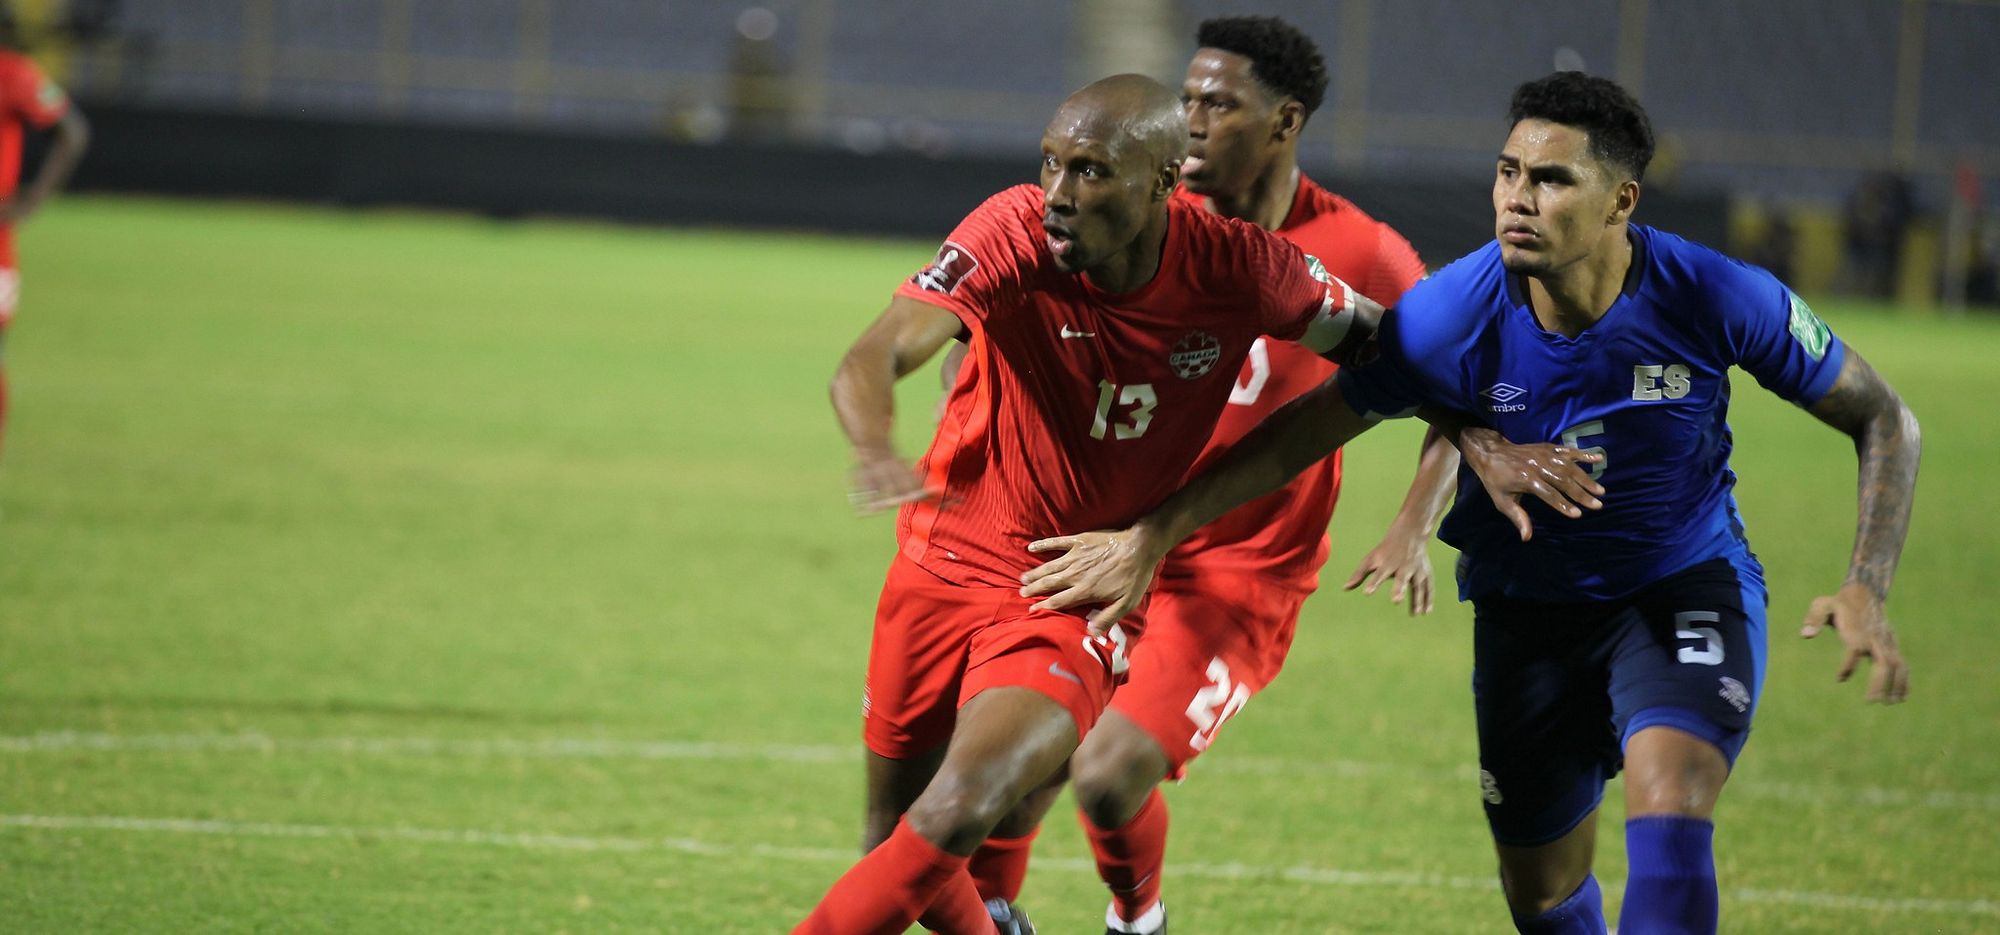 World Cup within reach for Canada after win in El Salvador